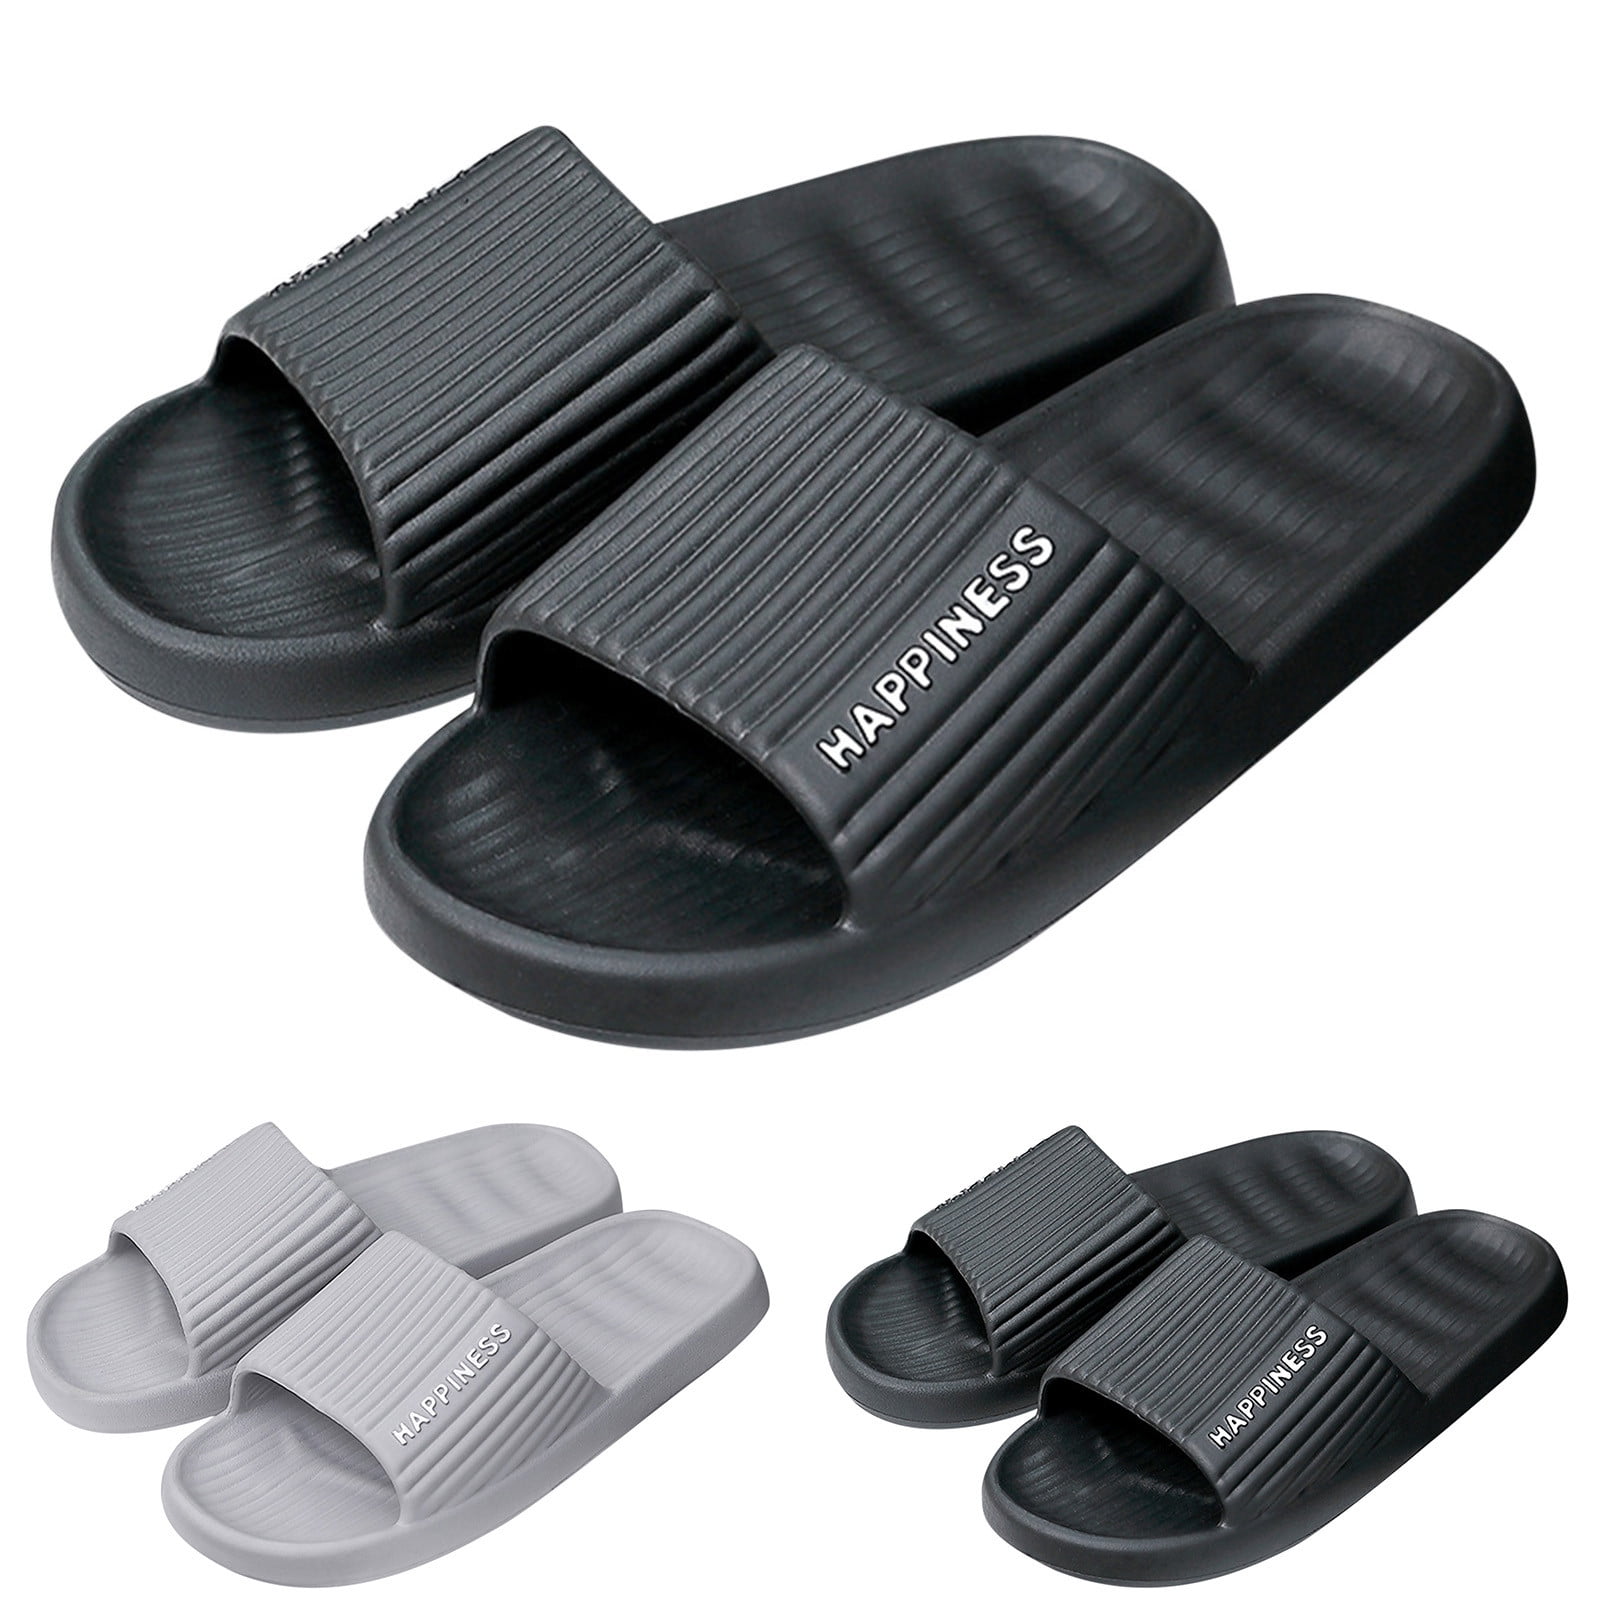 Akiihool Sandals for Men Summer Wide Width Sandals for Men Thick Sole ...